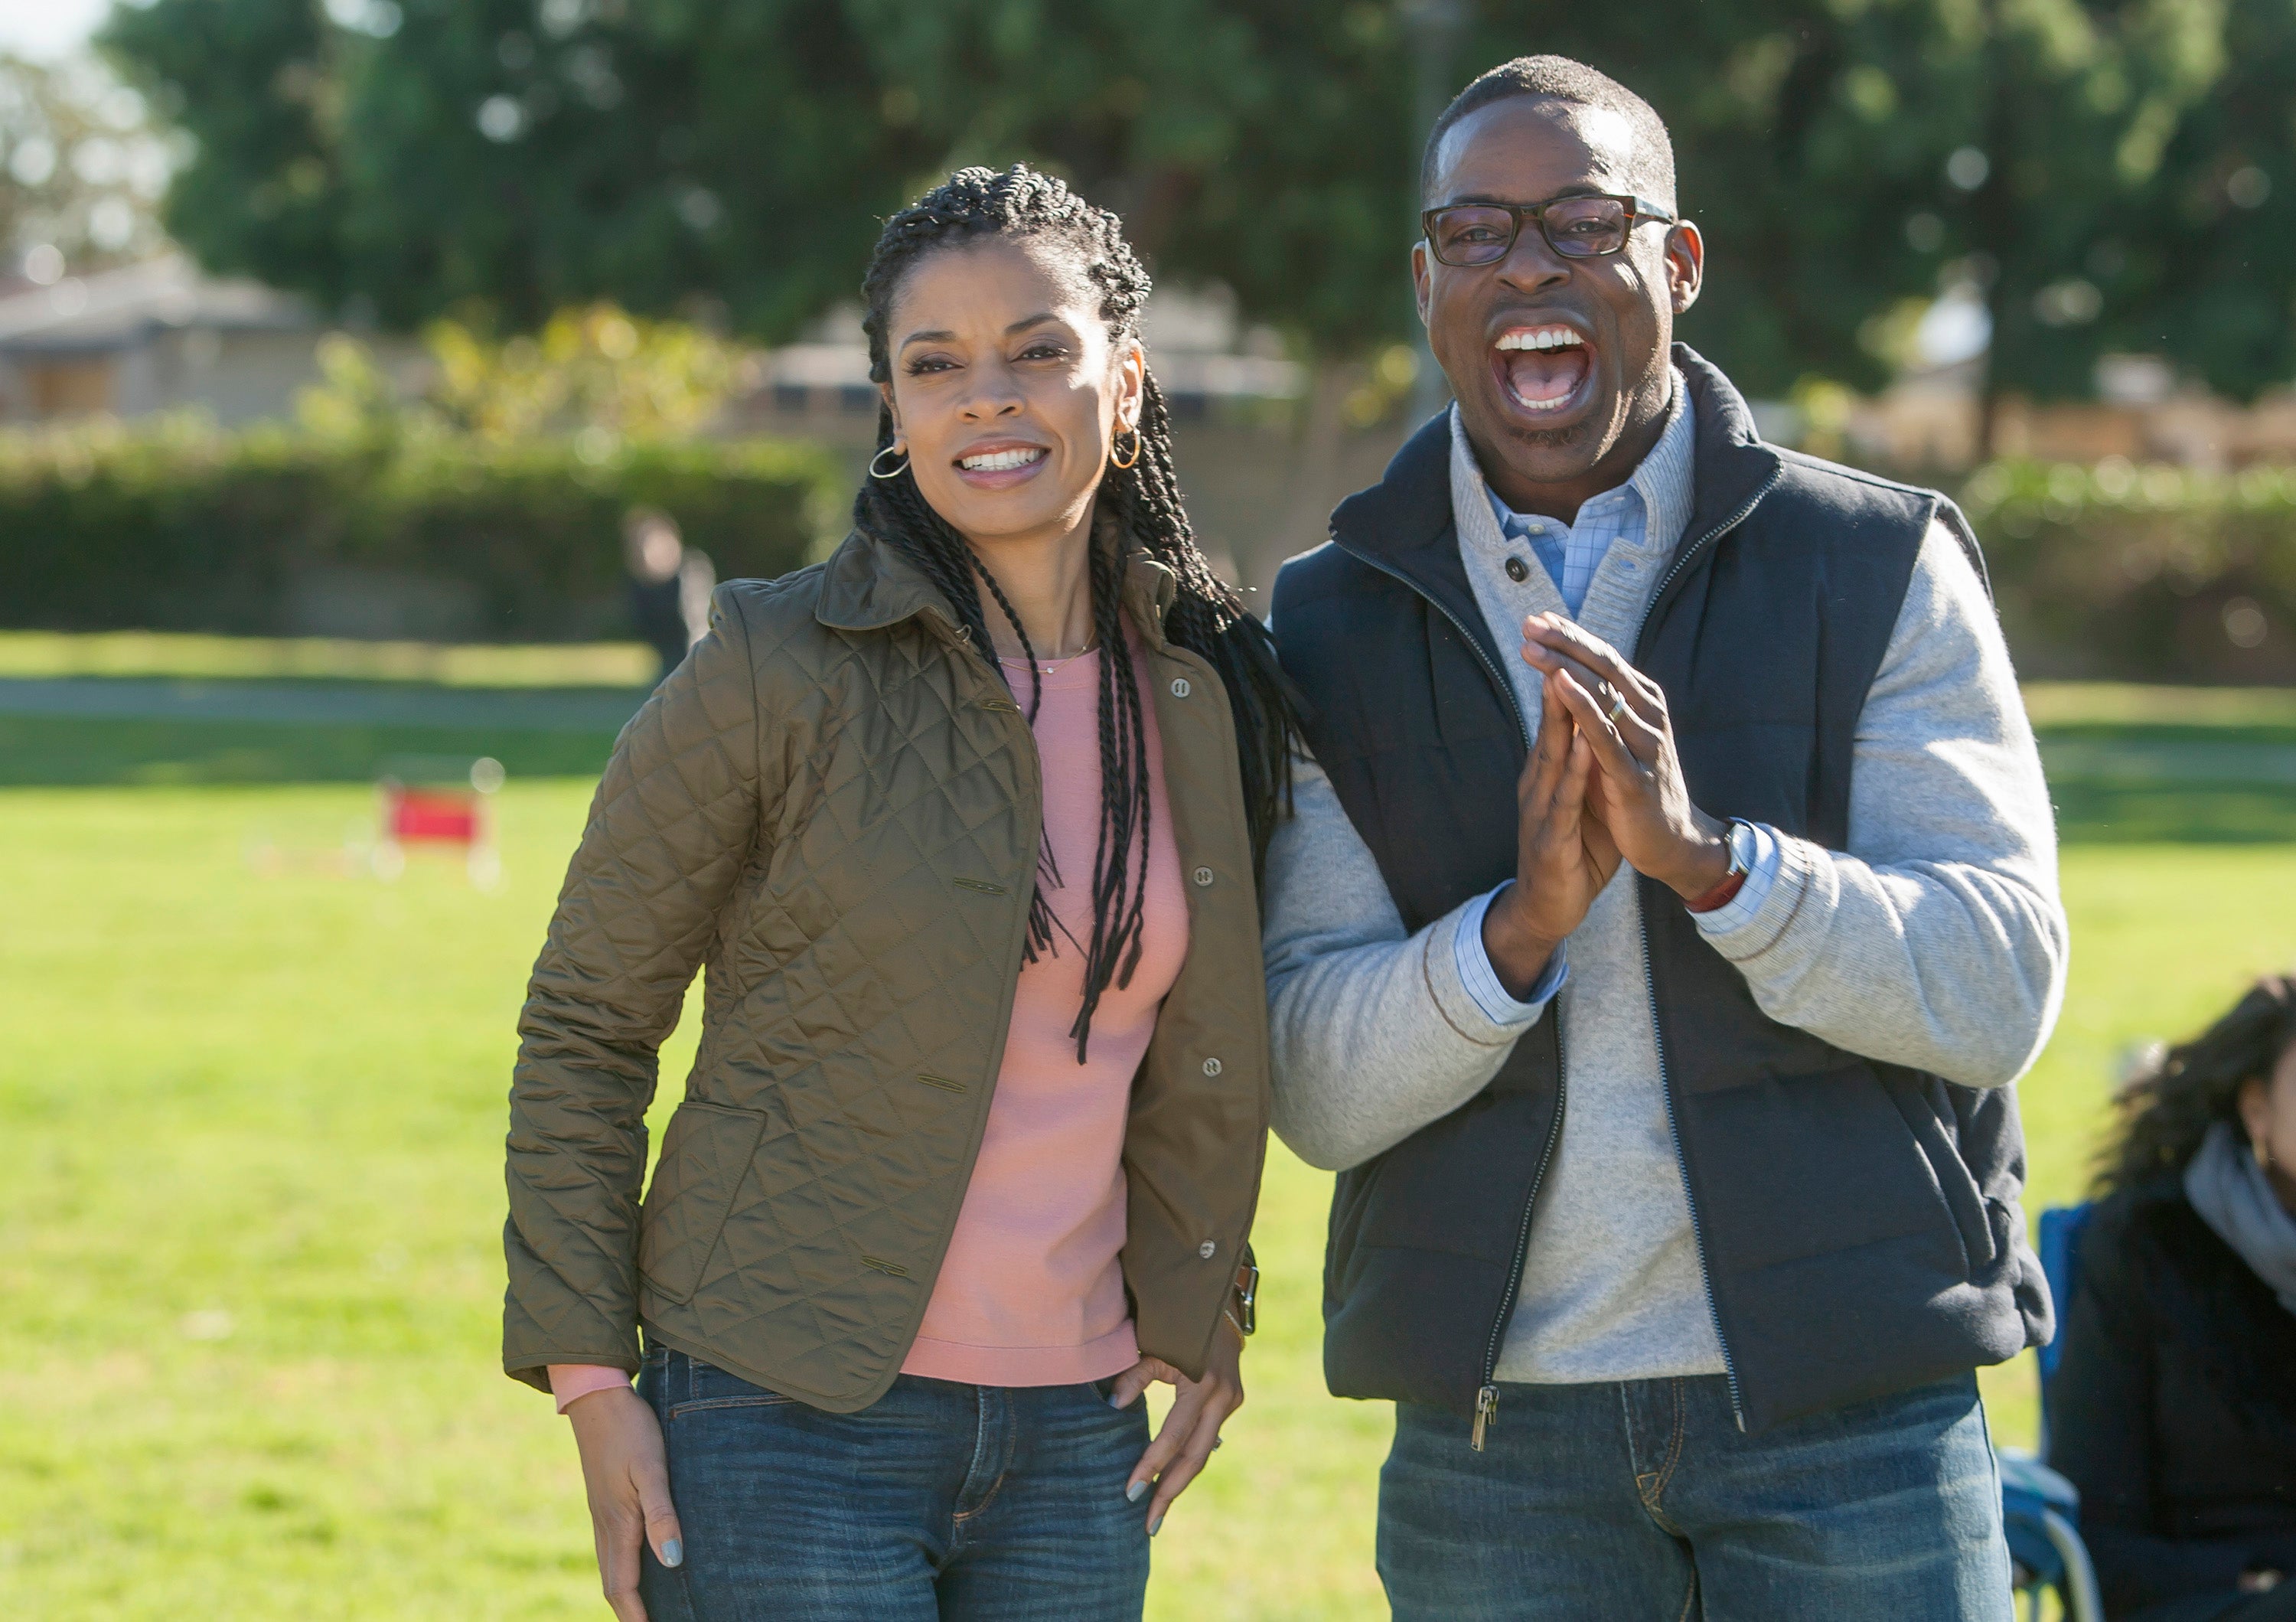 Sterling K. Brown Makes Another Small-Screen Score In “This Is Us”